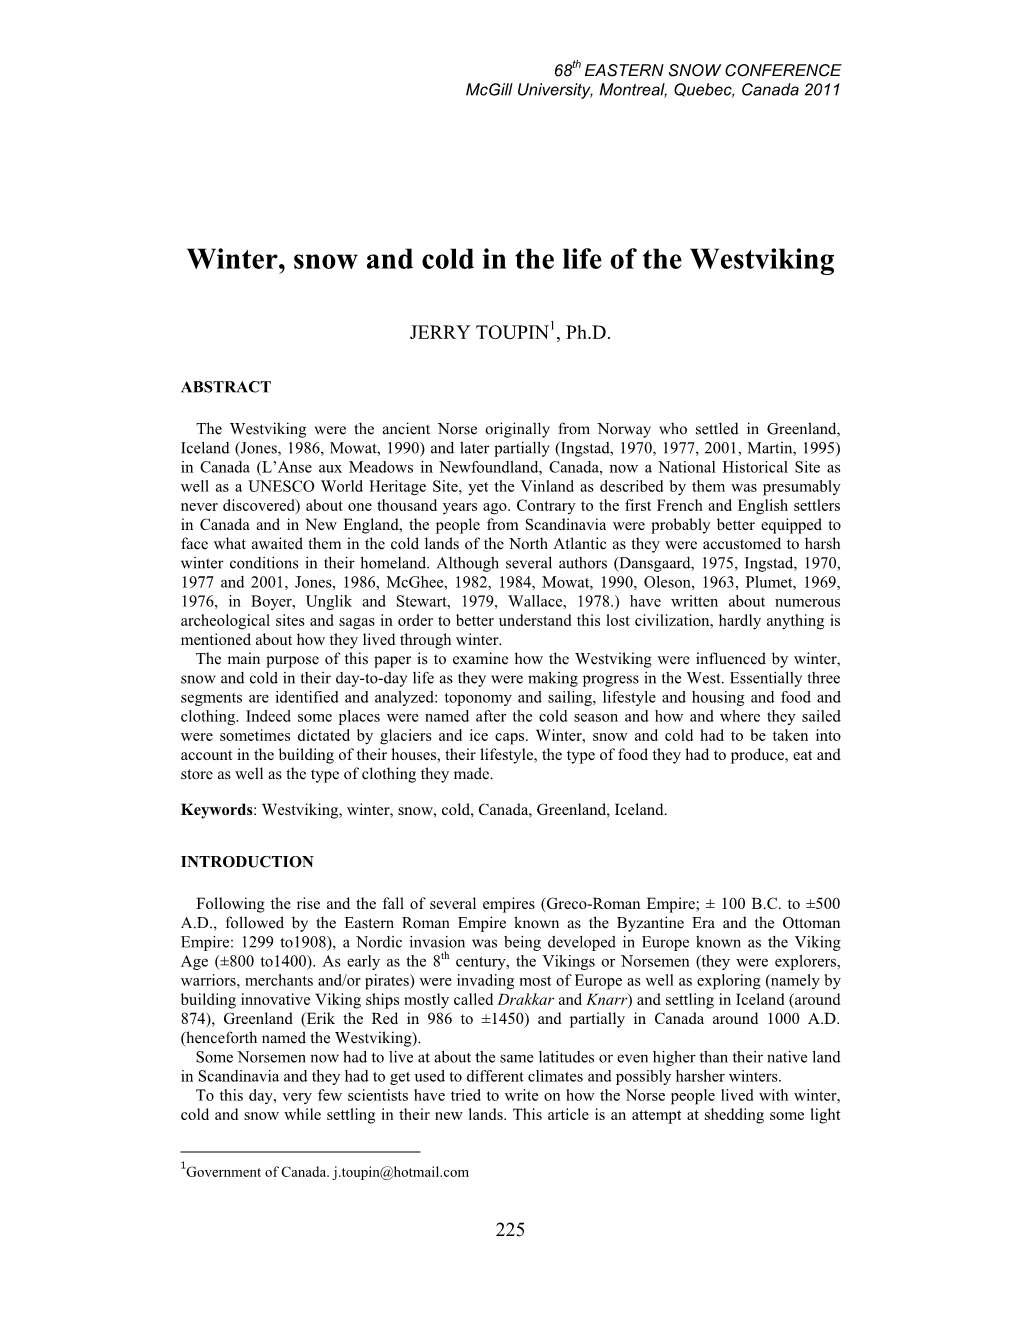 Winter, Snow and Cold in the Life of the Westviking